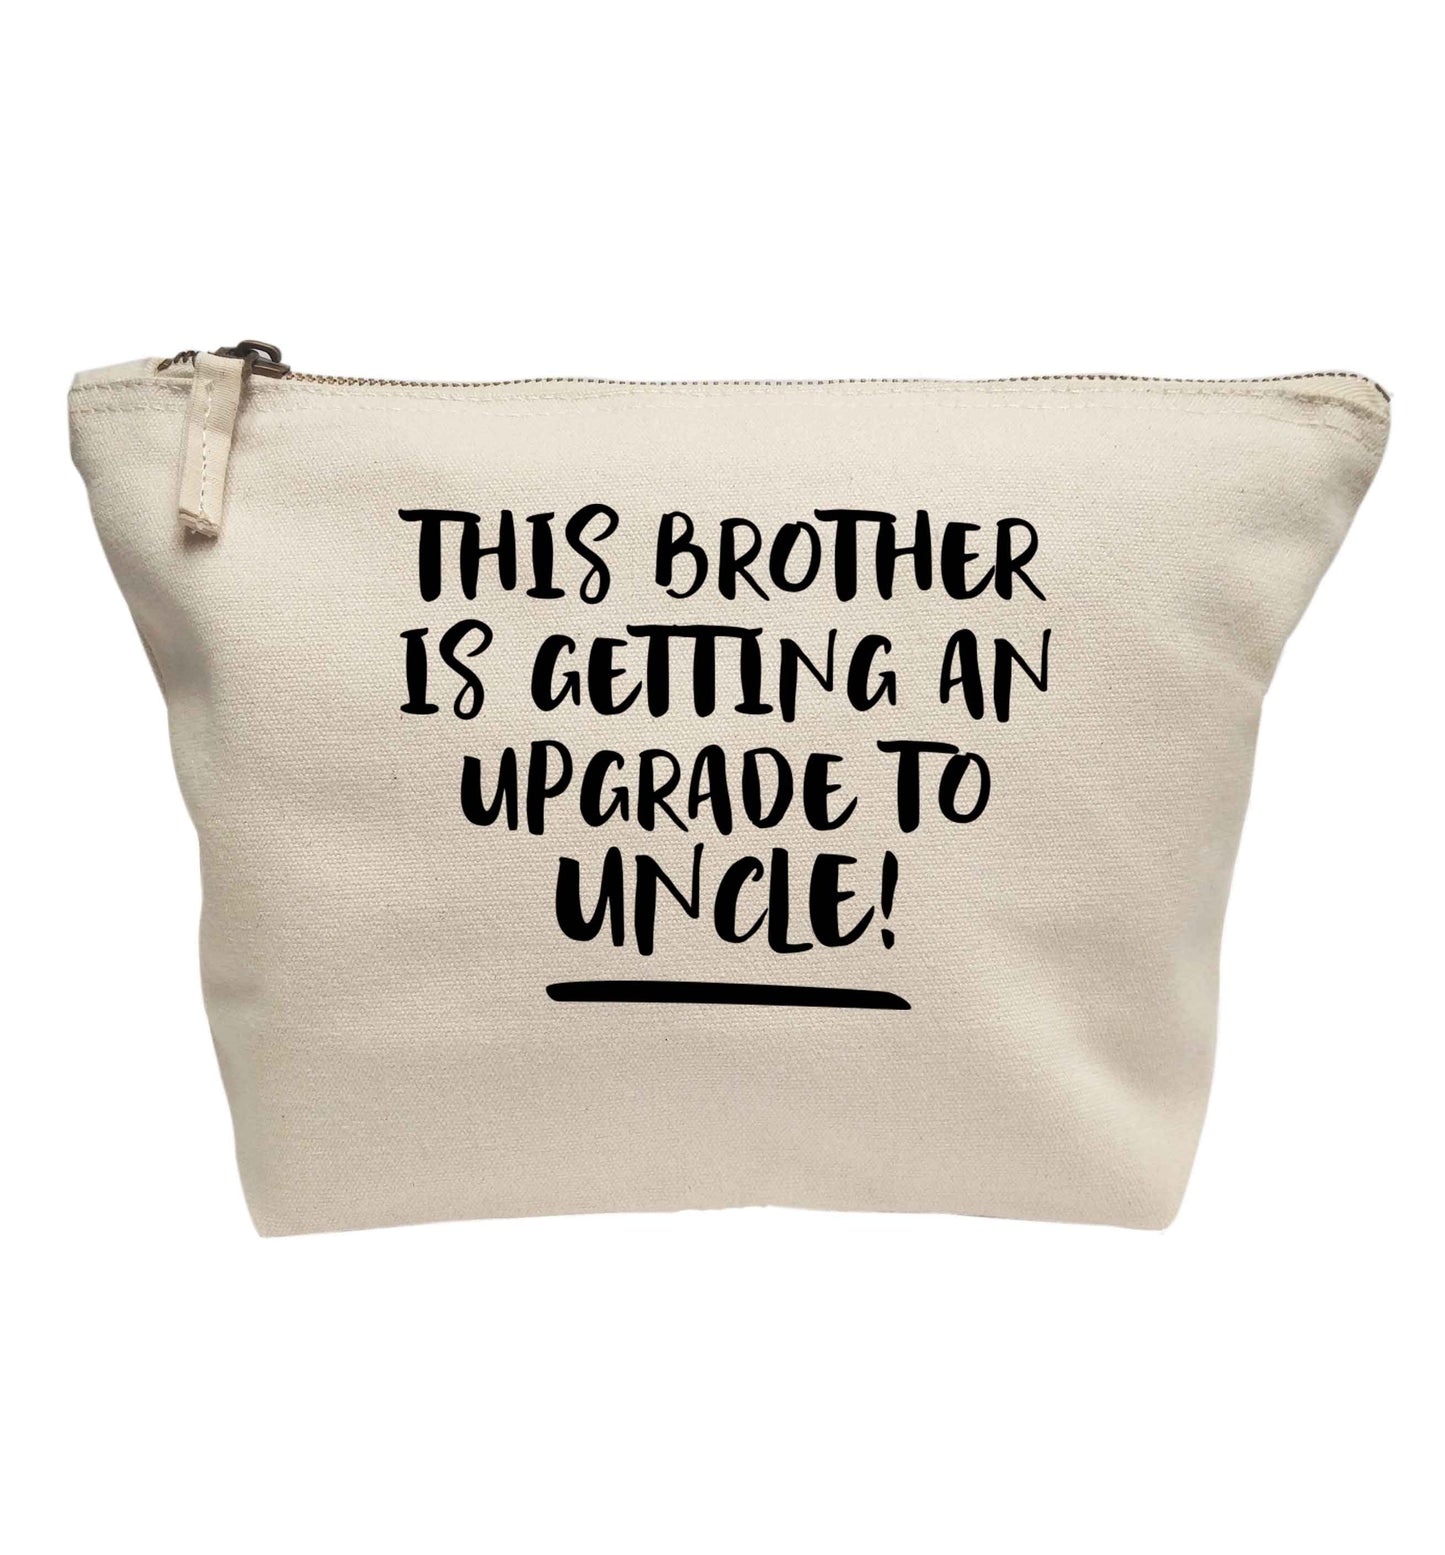 This brother is getting an upgrade to uncle! | makeup / wash bag